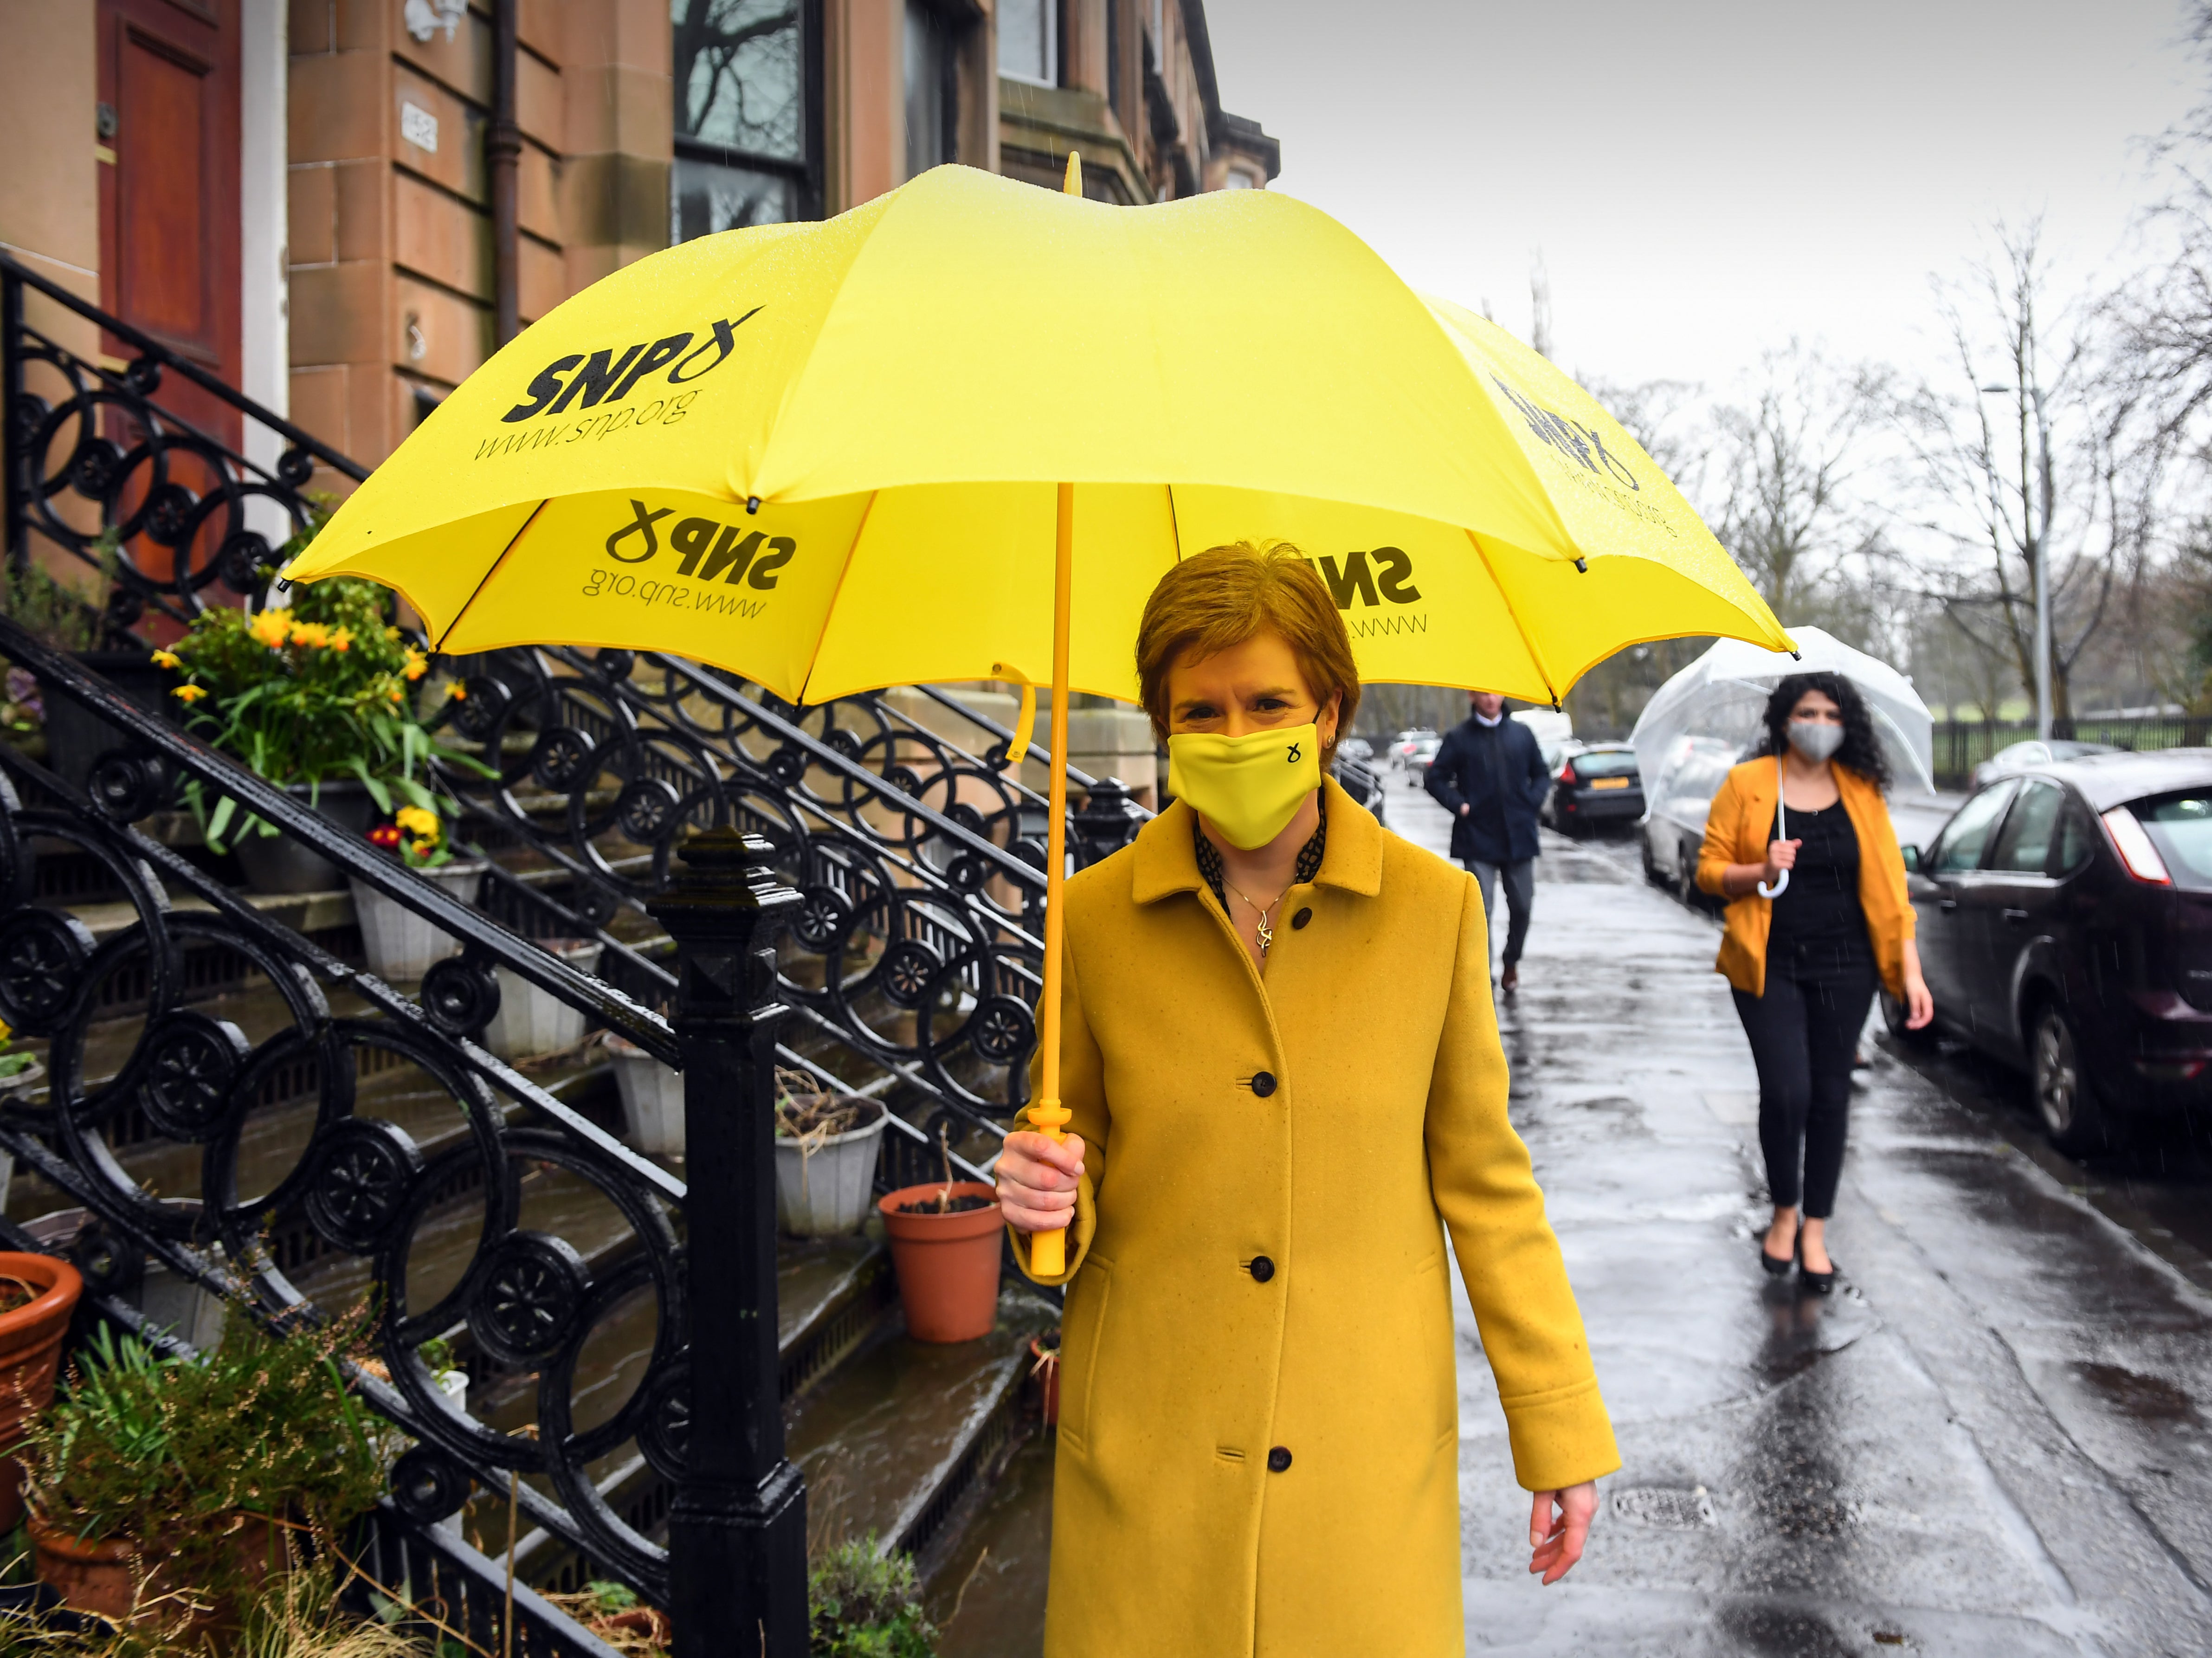 Nicola Sturgeon has begun campaigning for the 2021 election